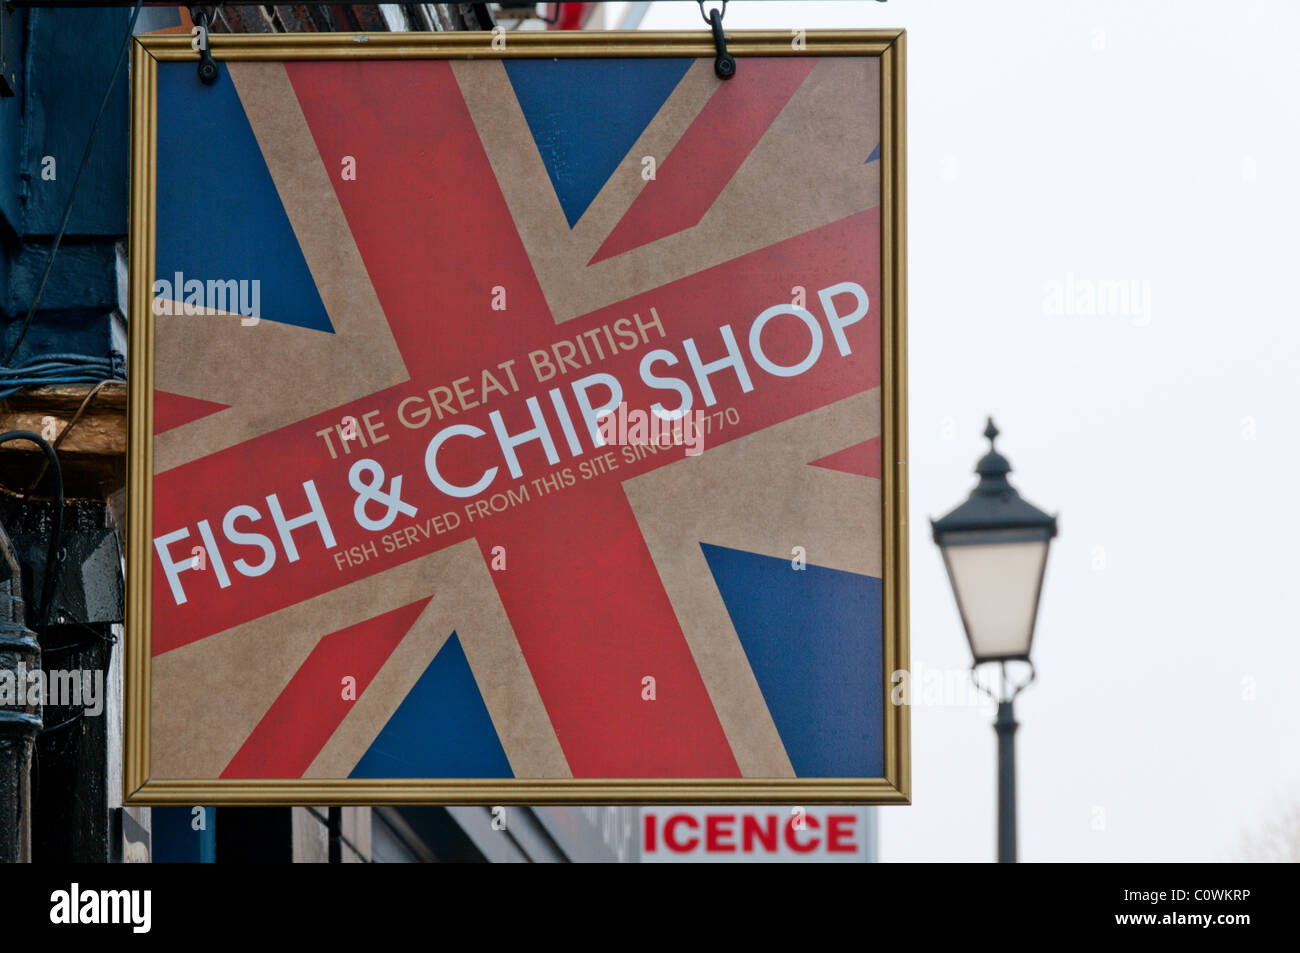 Sign for The Great British Fish & Chip Shop Stock Photo